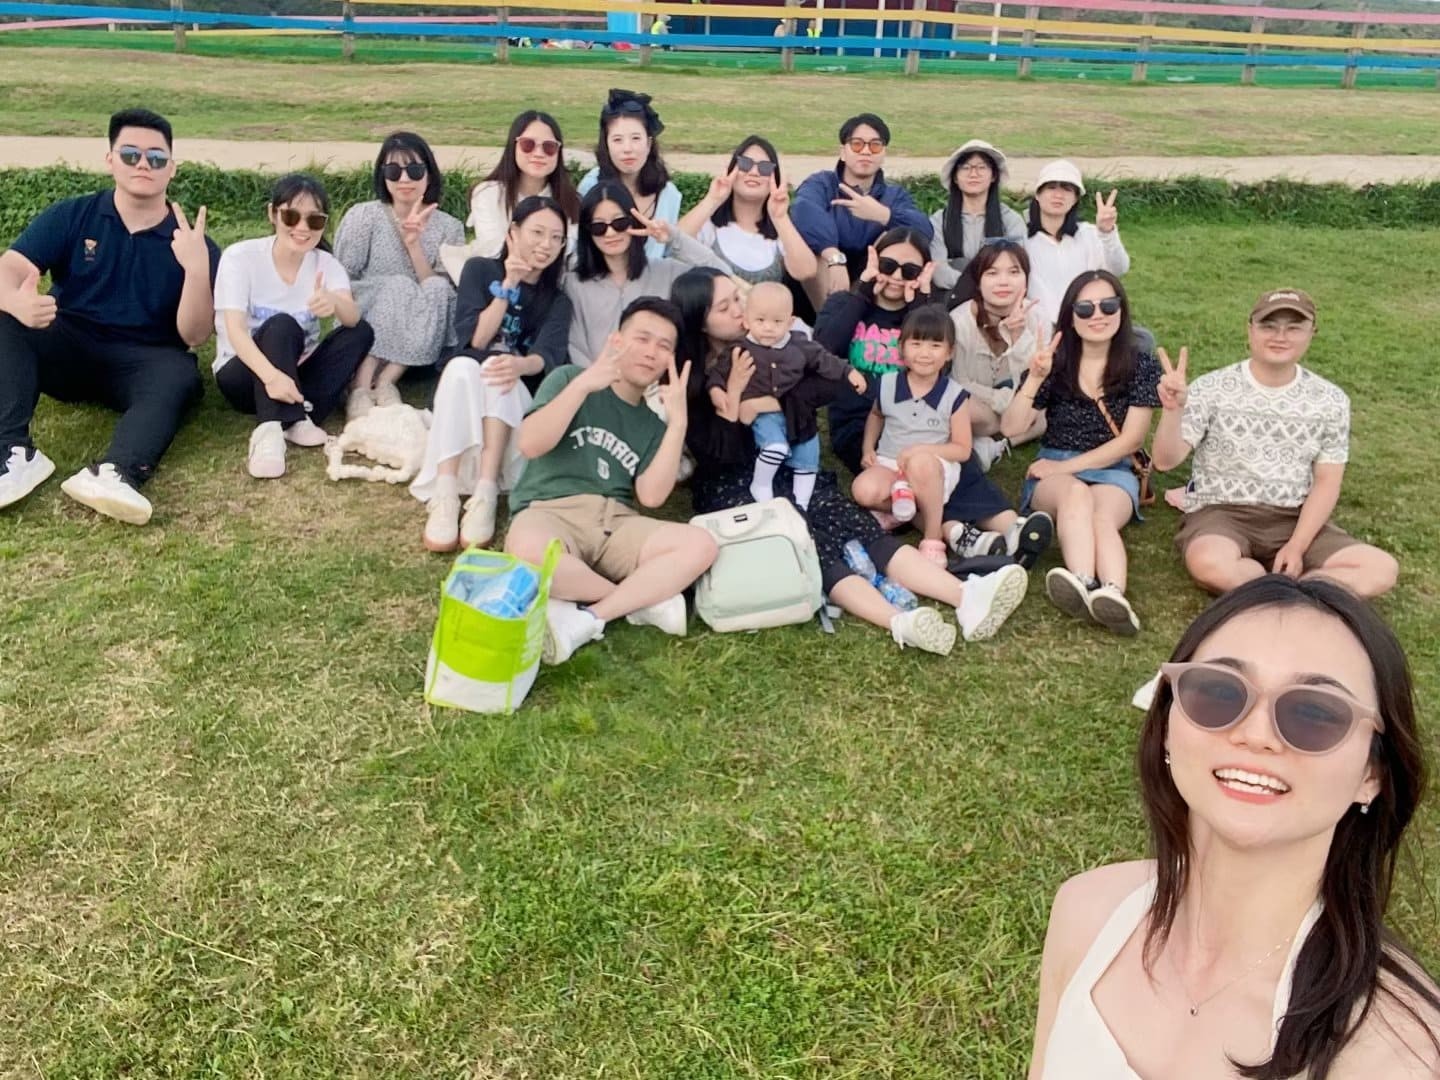 Hengdian Jewelry’s wonderful team building event held at Chenzhou Tourism Bureau